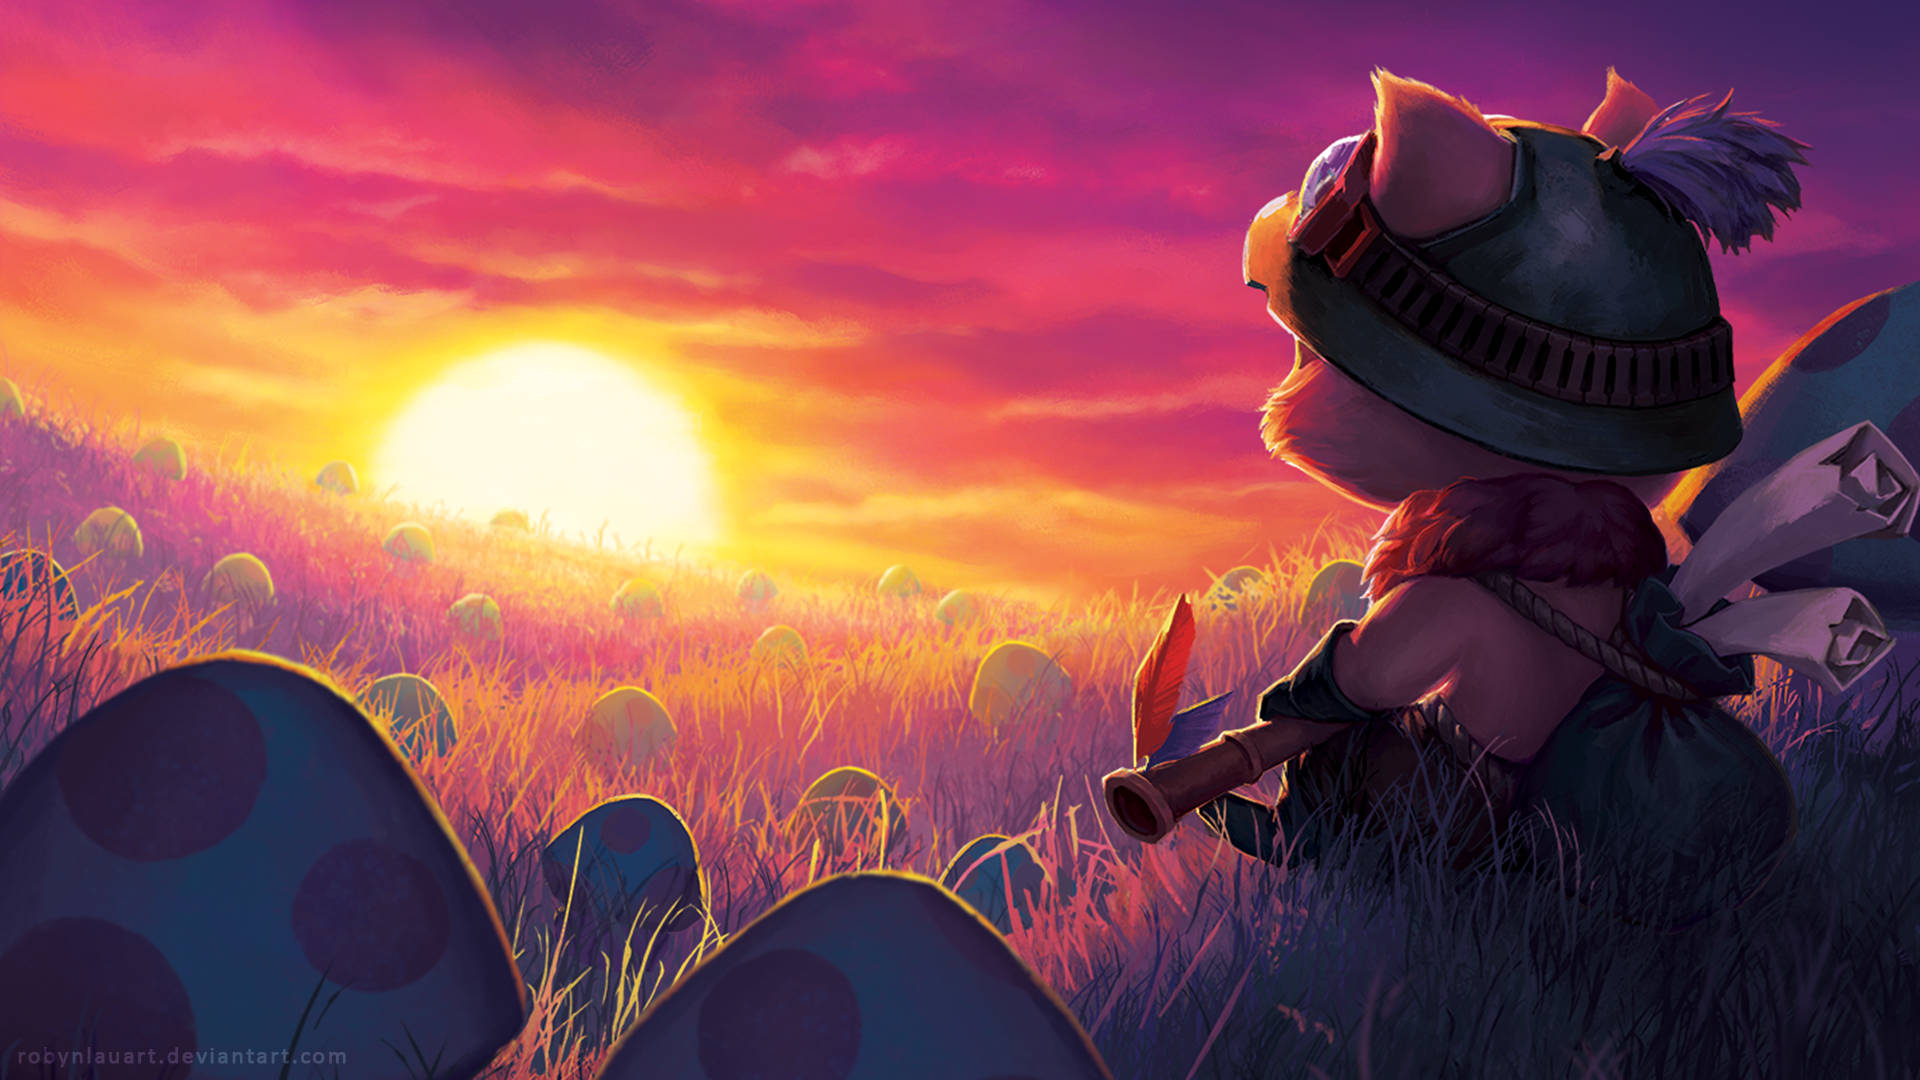 League Of Legends Teemo In Sunset Background